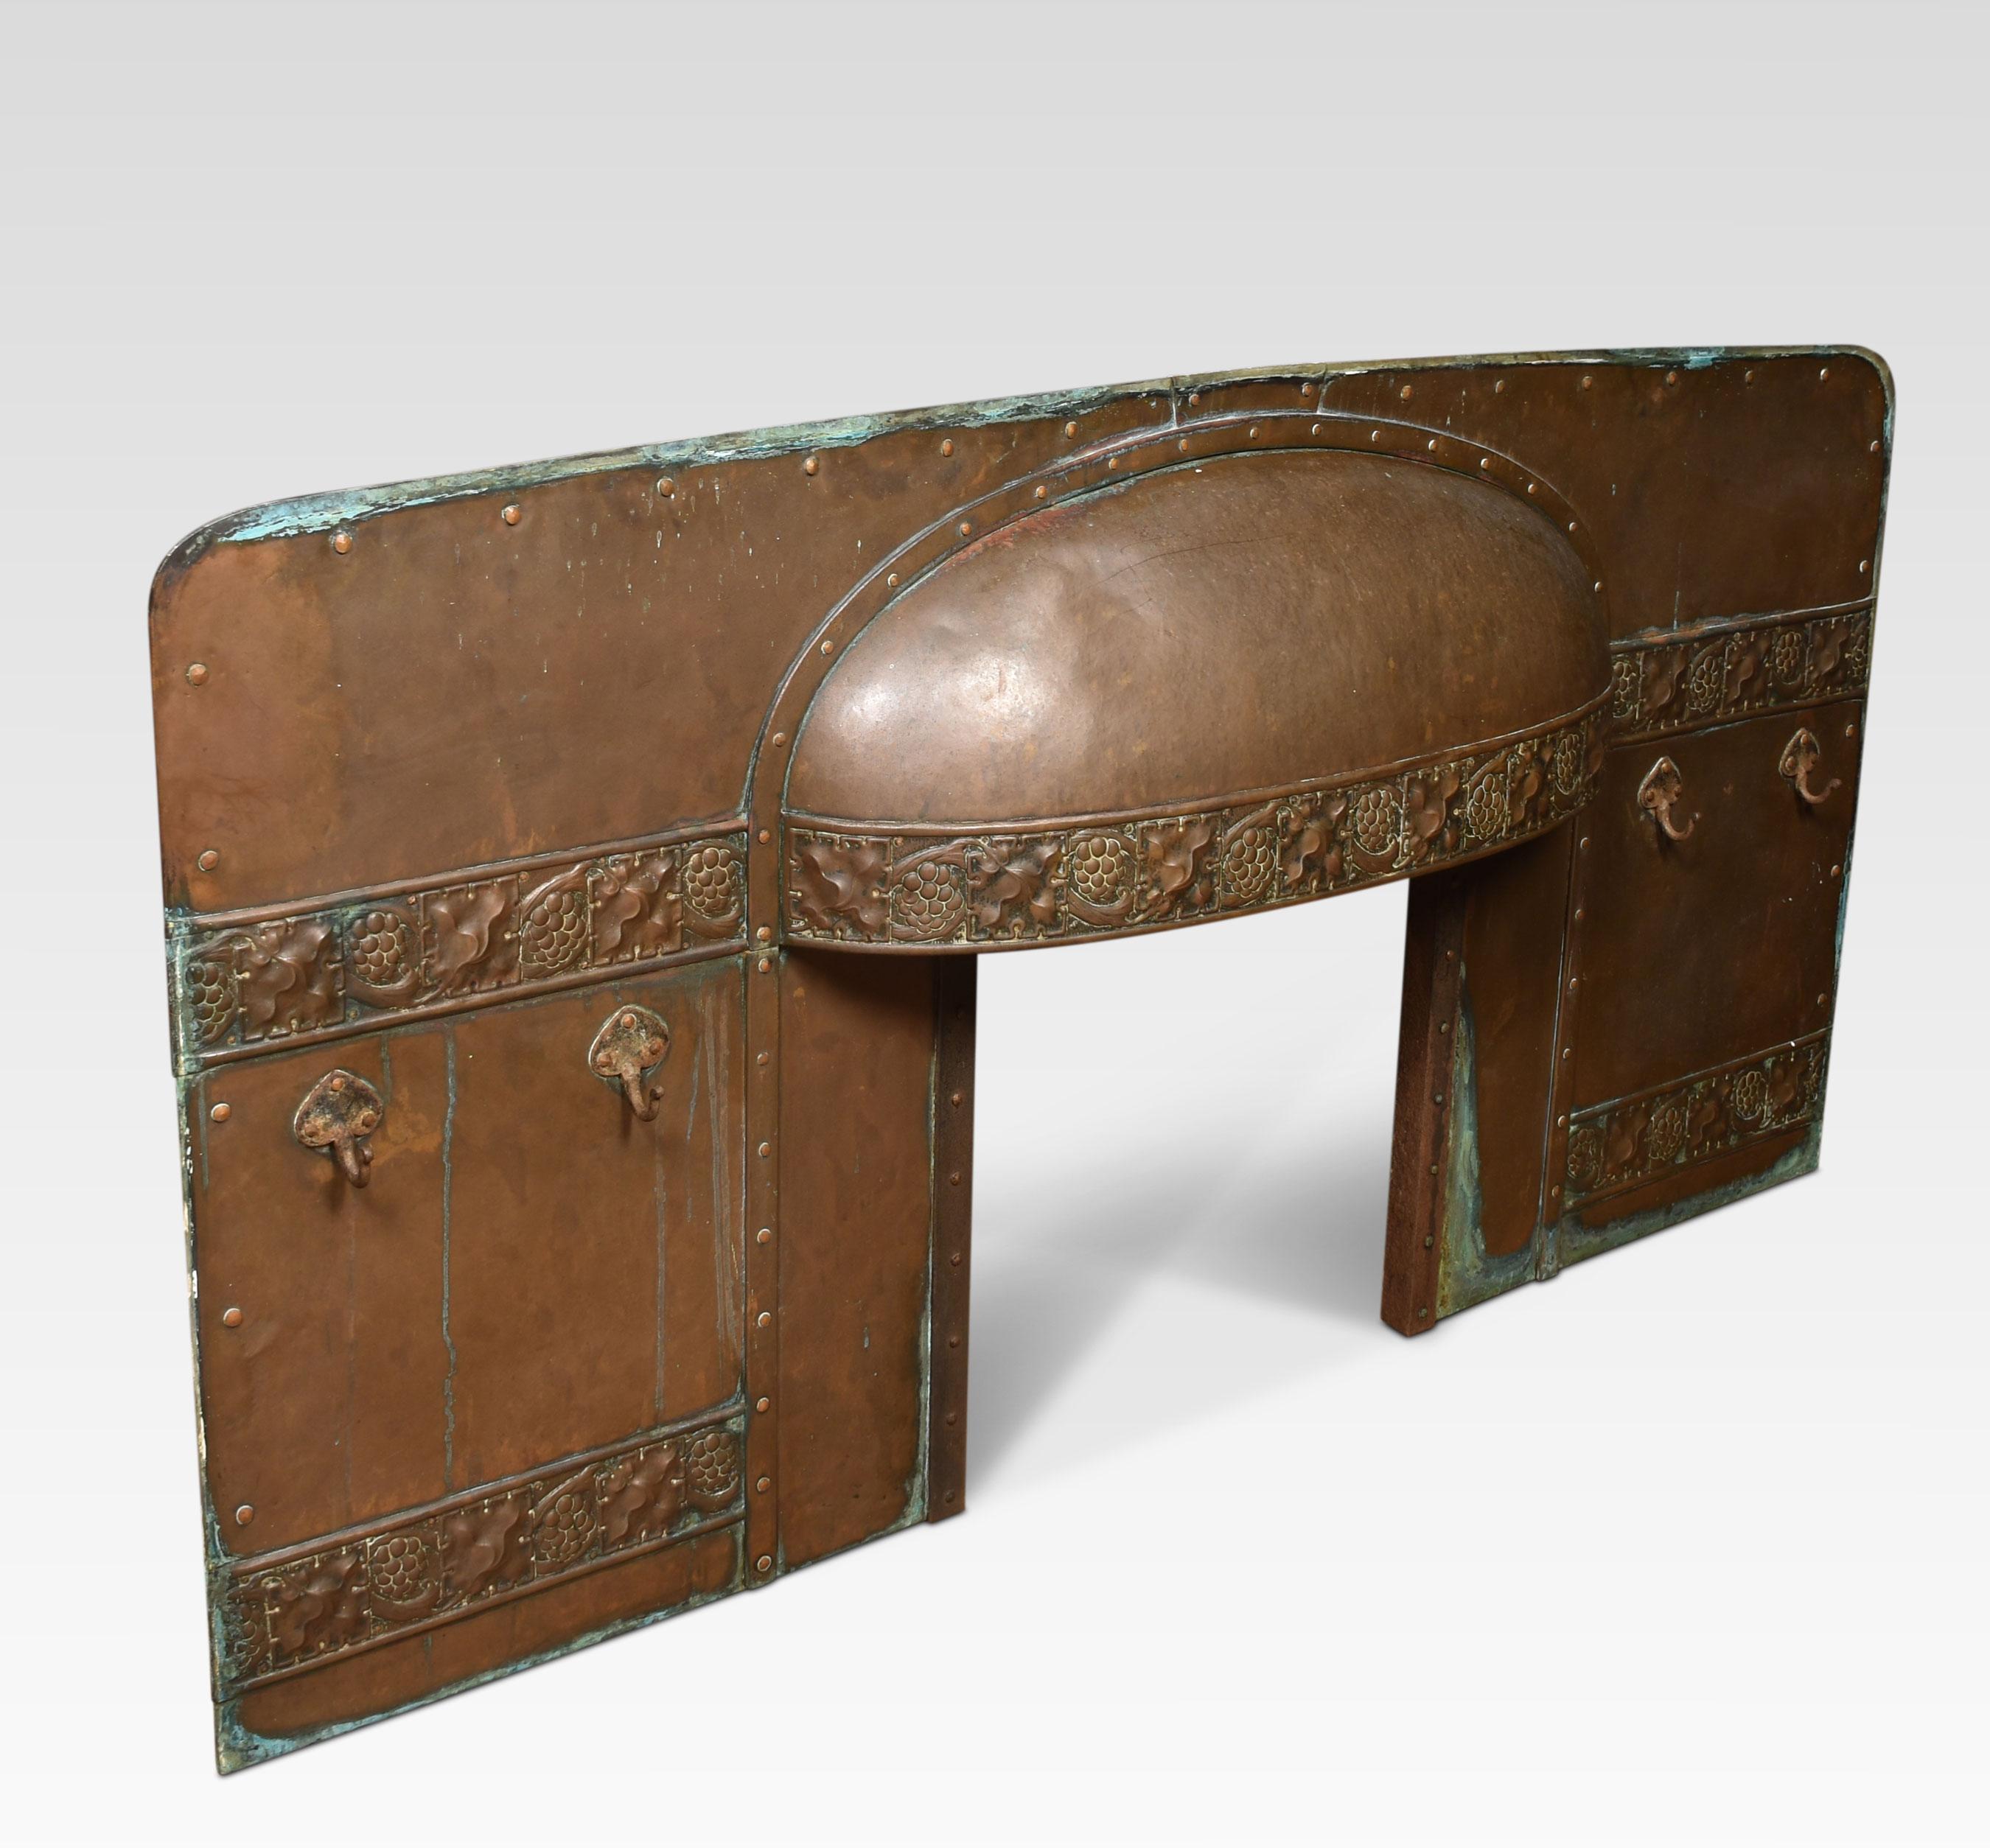 19th-century copper fire surrounds the domed centre above strap work embossed foliated decoration.
Dimensions
Height 36 inches
Width 73.5 inches
Depth 7.5 inches

Internal measurements
Height 22.5 inches
Width 21 inches.